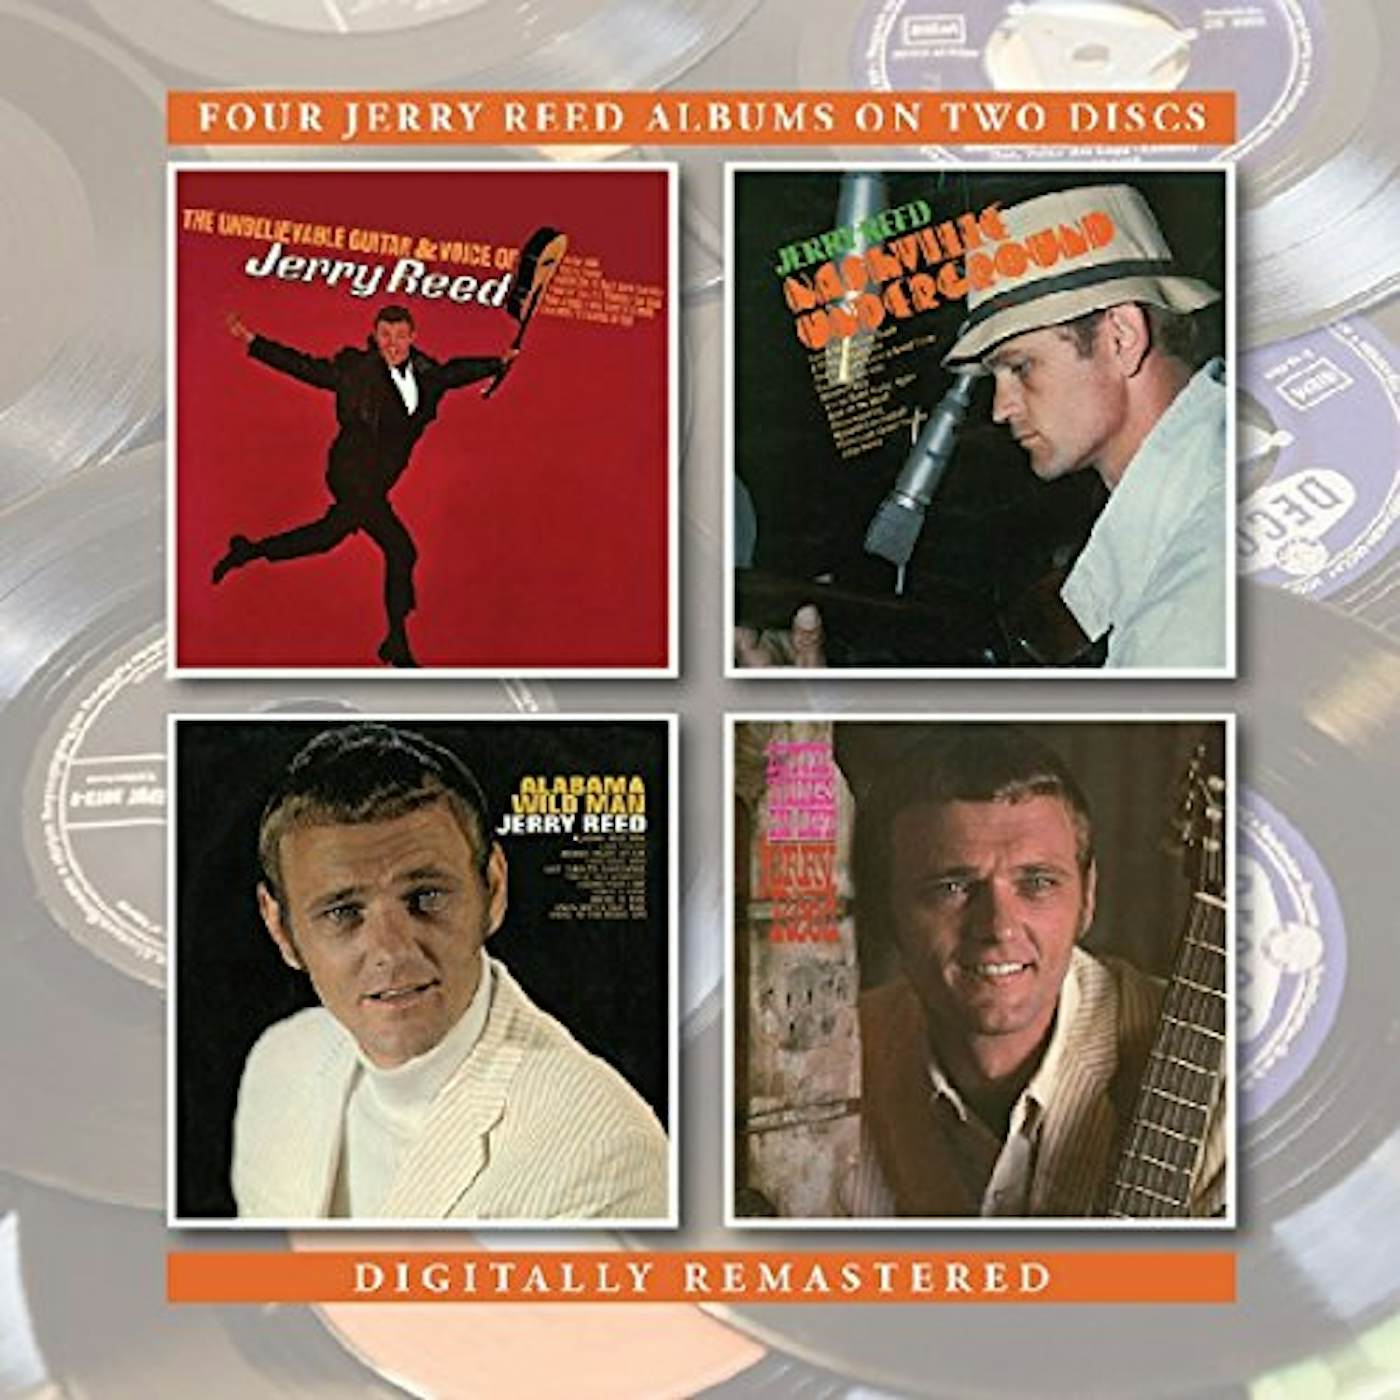 Jerry Reed UNBELIEVABLE GUITAR AND VOICE OF / NASHVILLE CD